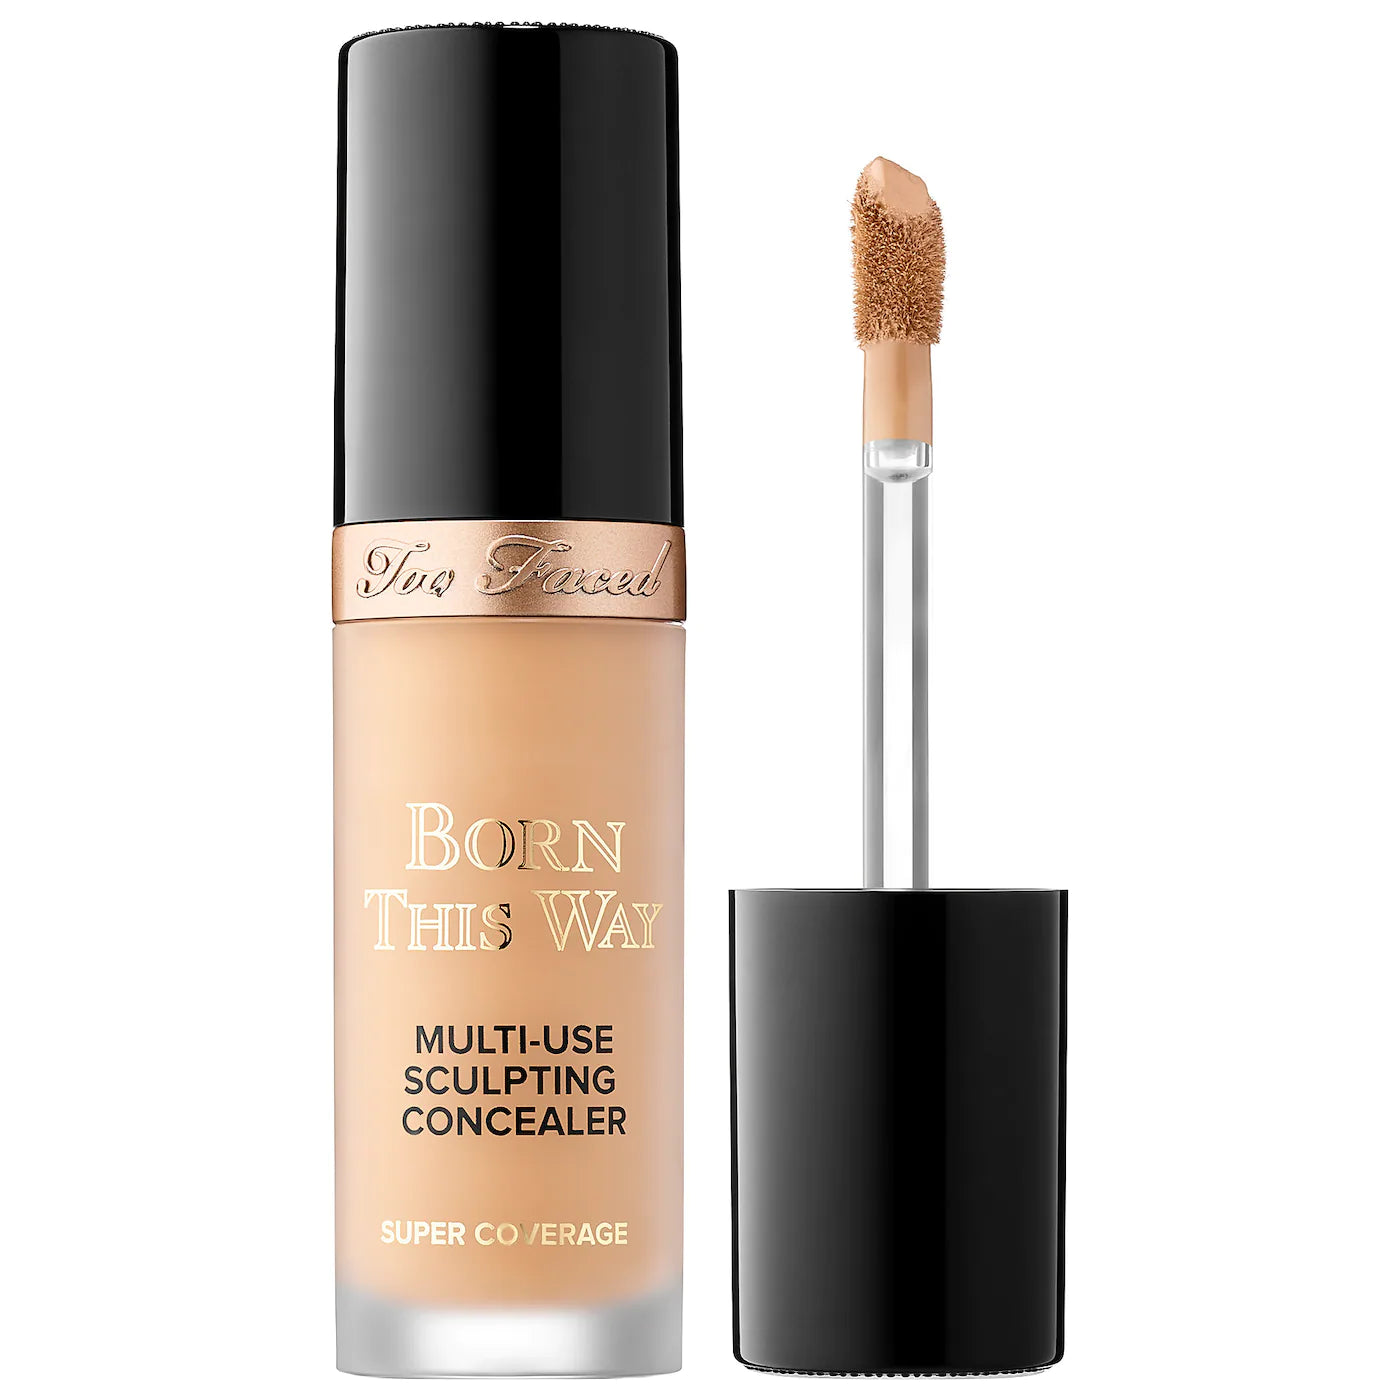 Too Faced Born This Way Super Coverage Multi-Use Sculpting Concealer